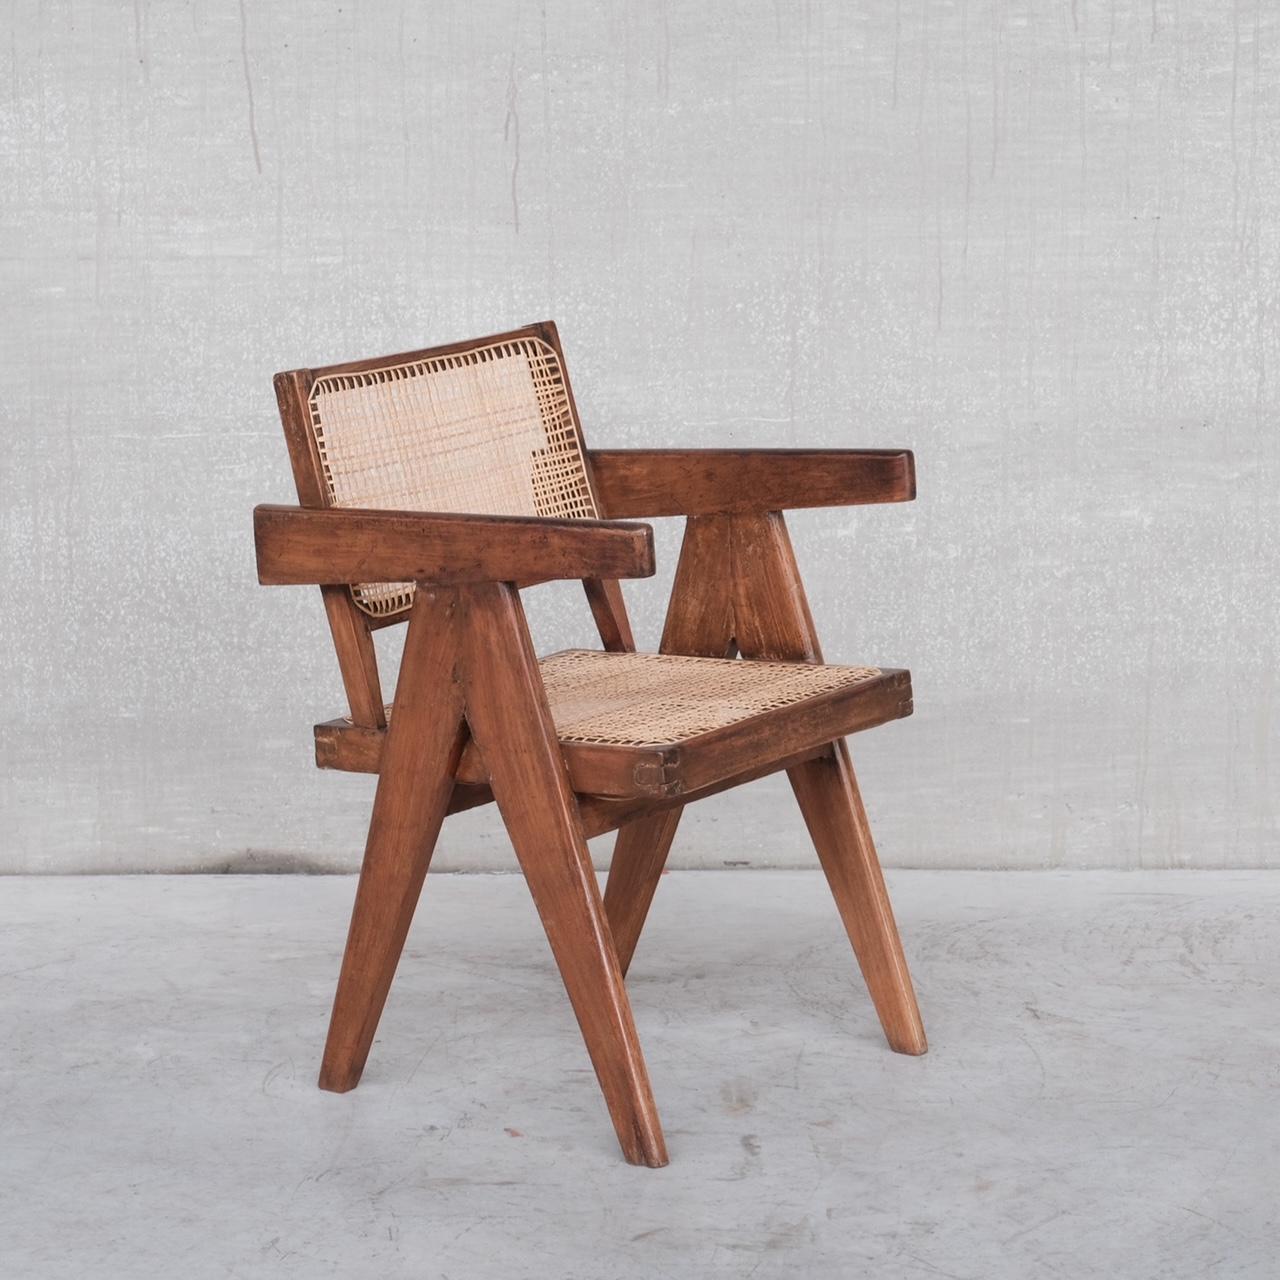 An authentic Pierre Jeanneret office or desk chair. 

Teak and cane. 

India, Chandigarh, c1960s. 

A flexible piece of design history that can be used in bedrooms, lounges etc. - any where it sits it will command attention. 

Re-caned as